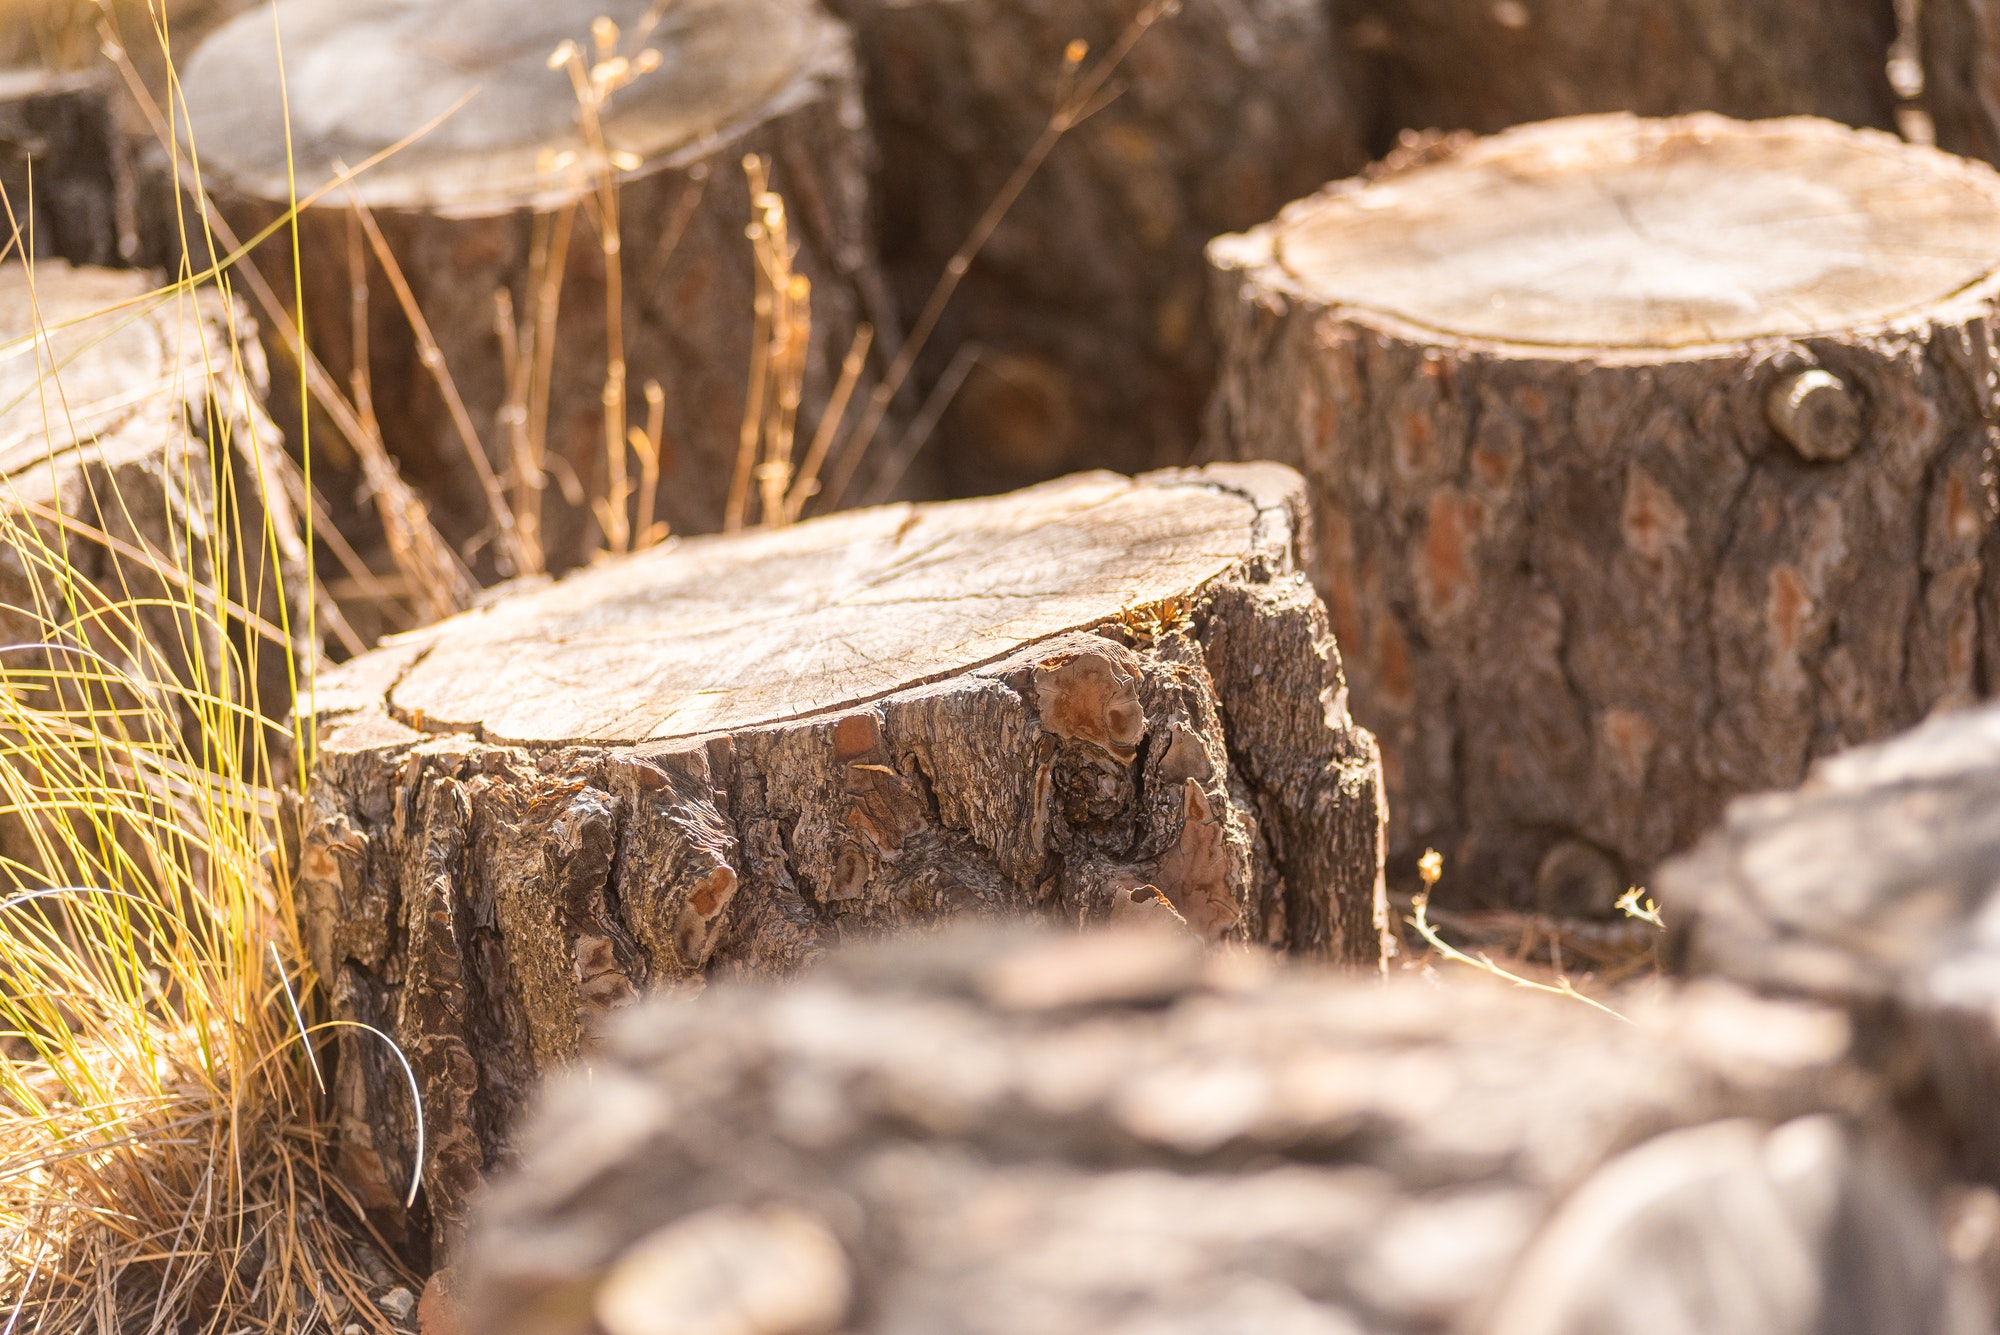 Group of tree stumps in sunny countryside